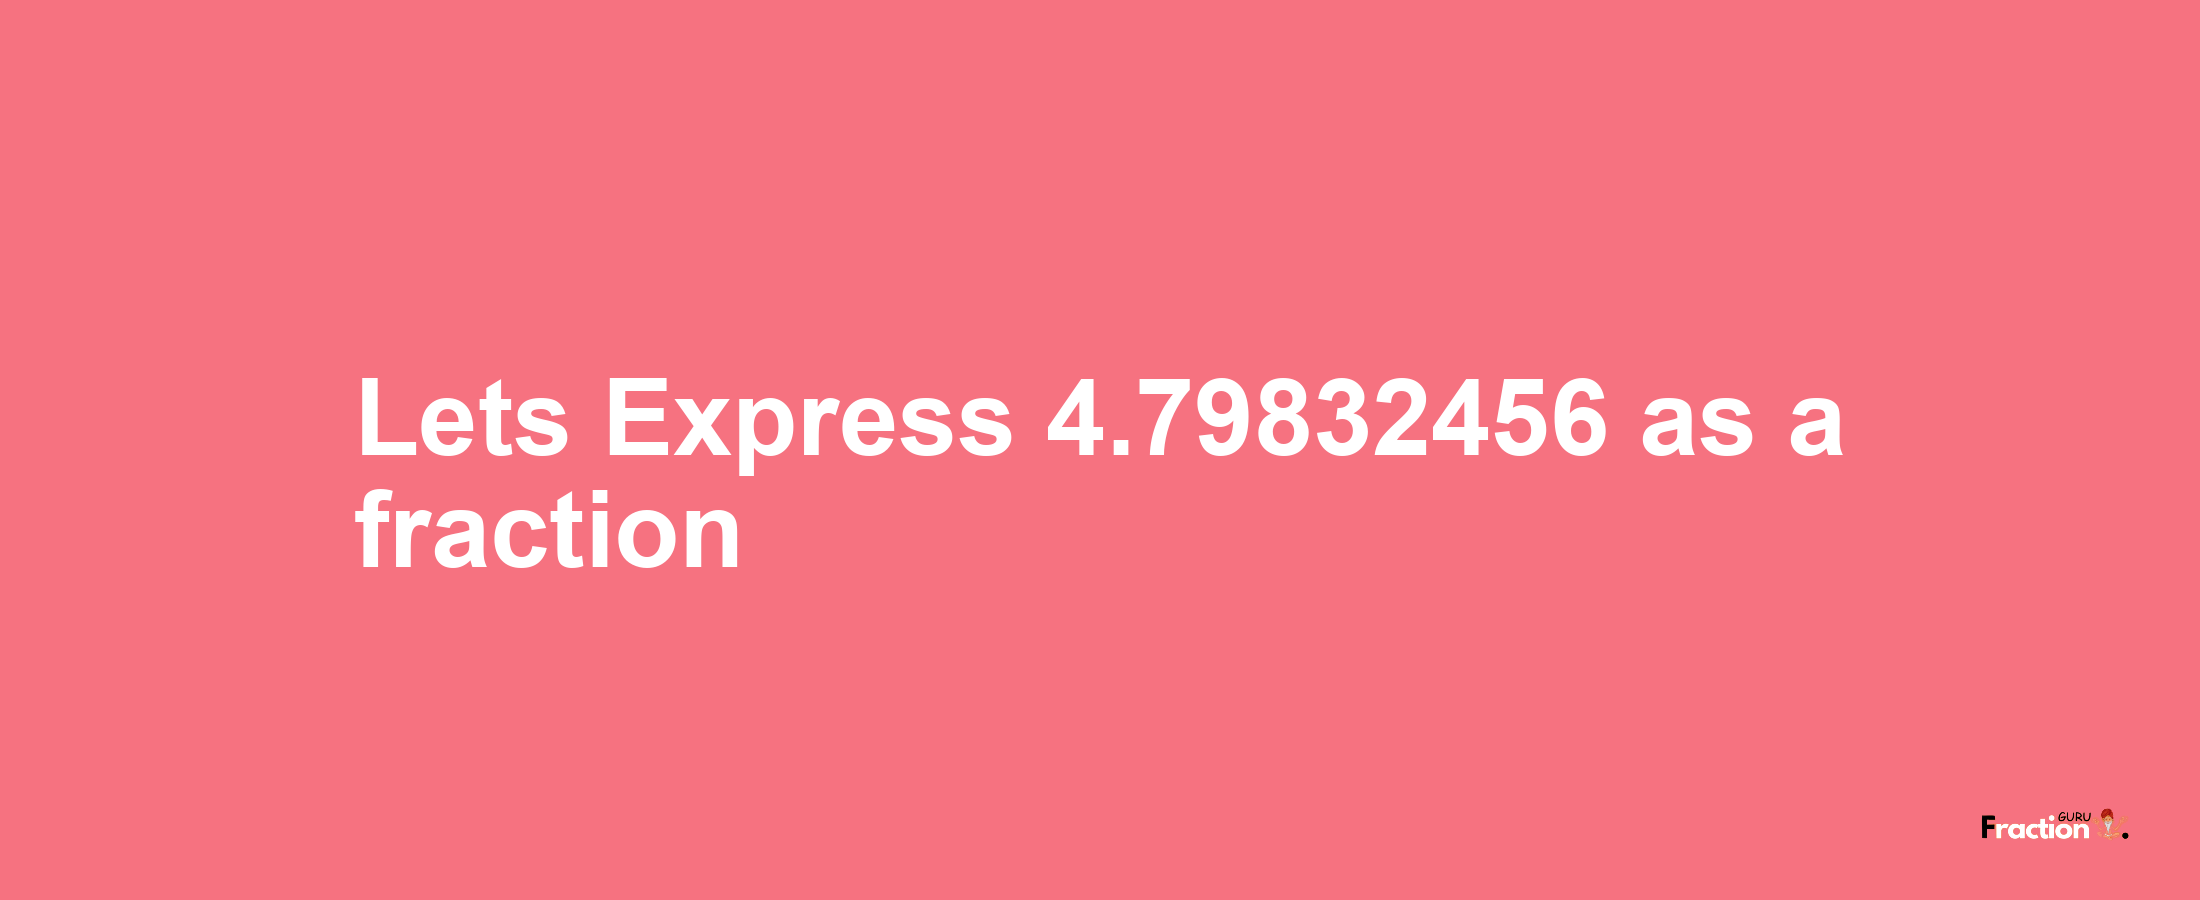 Lets Express 4.79832456 as afraction